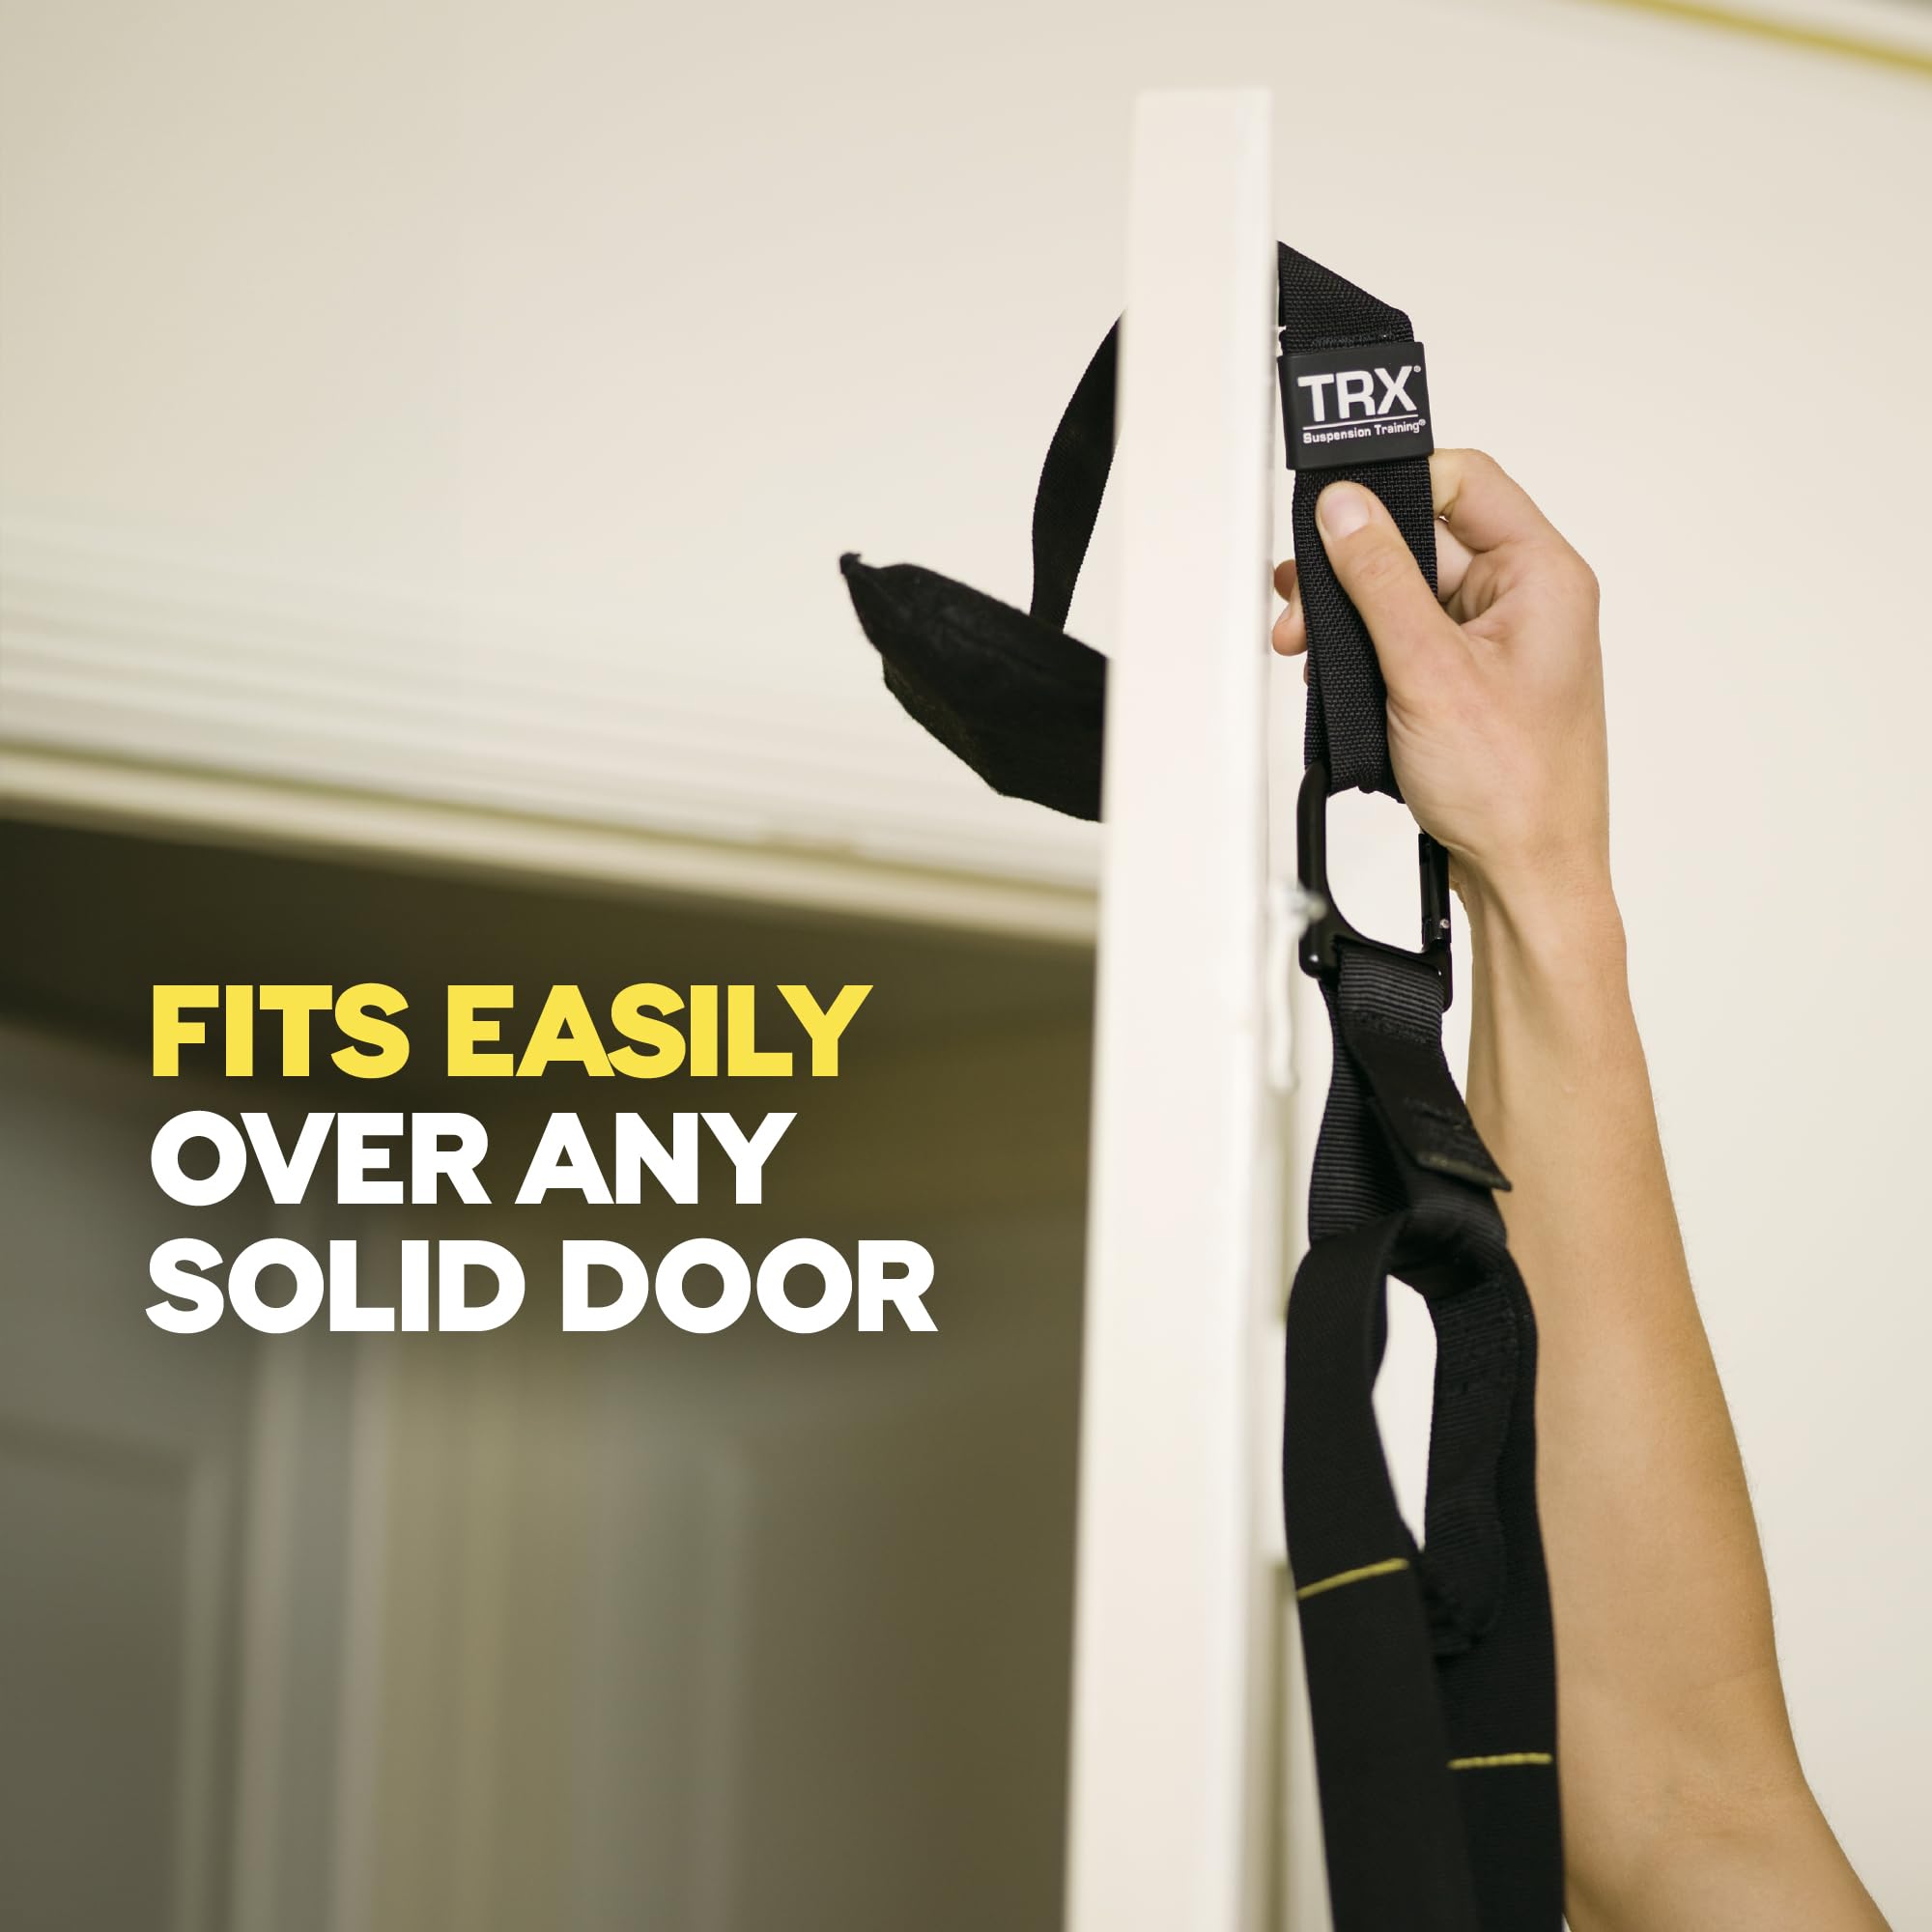 TRX Door Anchor for TRX Suspension Training Straps, Strap Anchor, Fitness Equipment Accessory